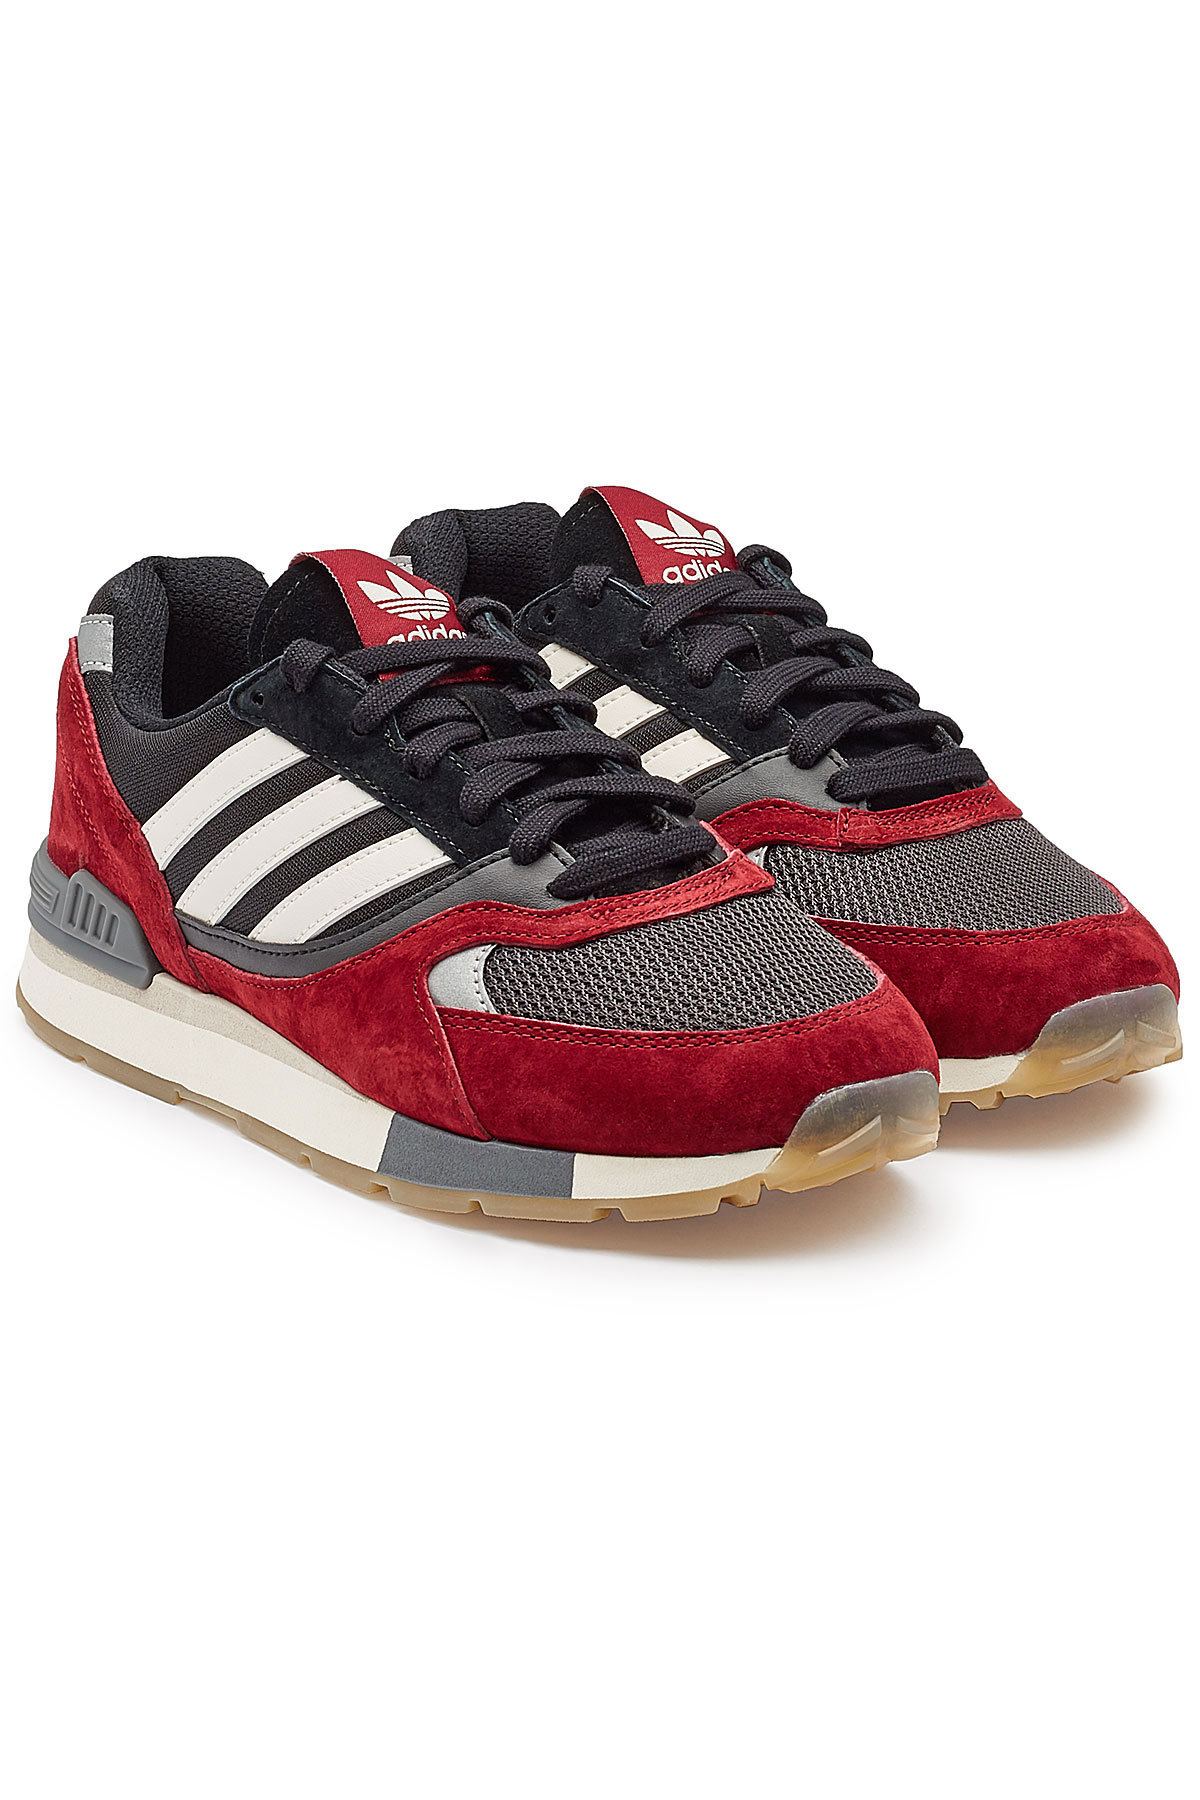 adidas quesence red